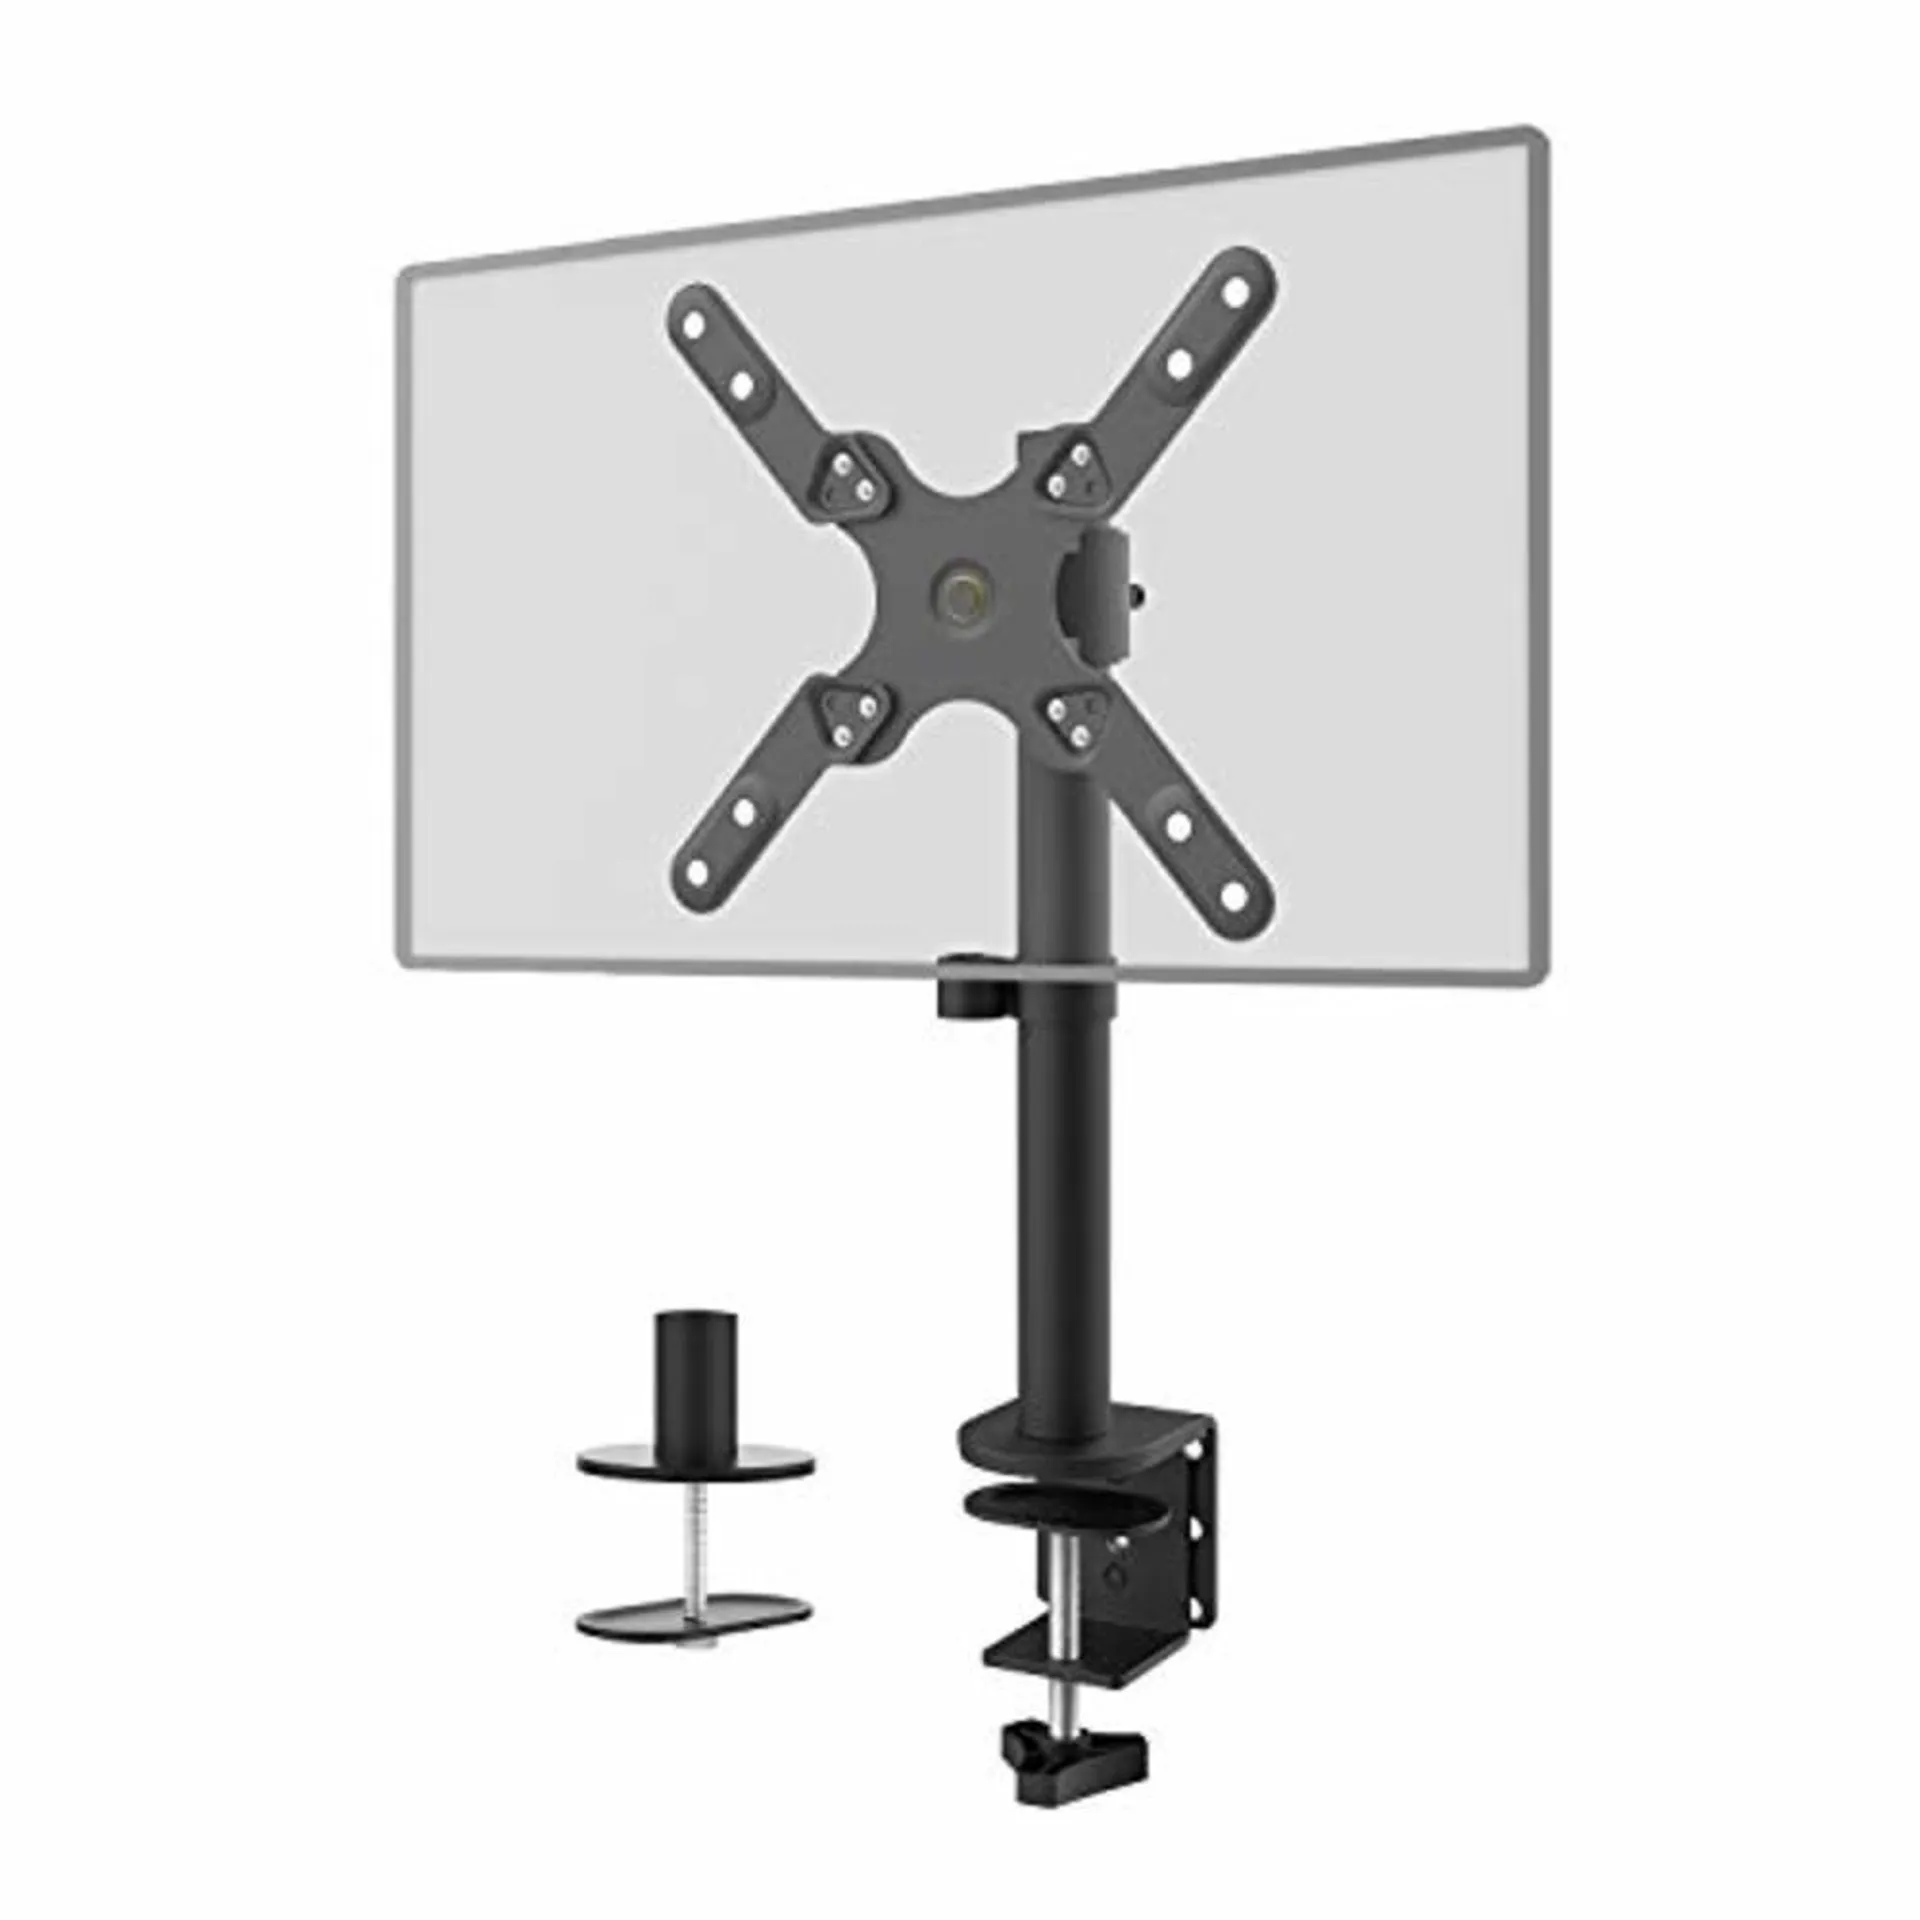 WALI Single LCD Monitor Desk Mount Fully Adjustable Fit One Screen 13 to 42 inch, 22 lbs. Weight Capacity (M001SXL), Black